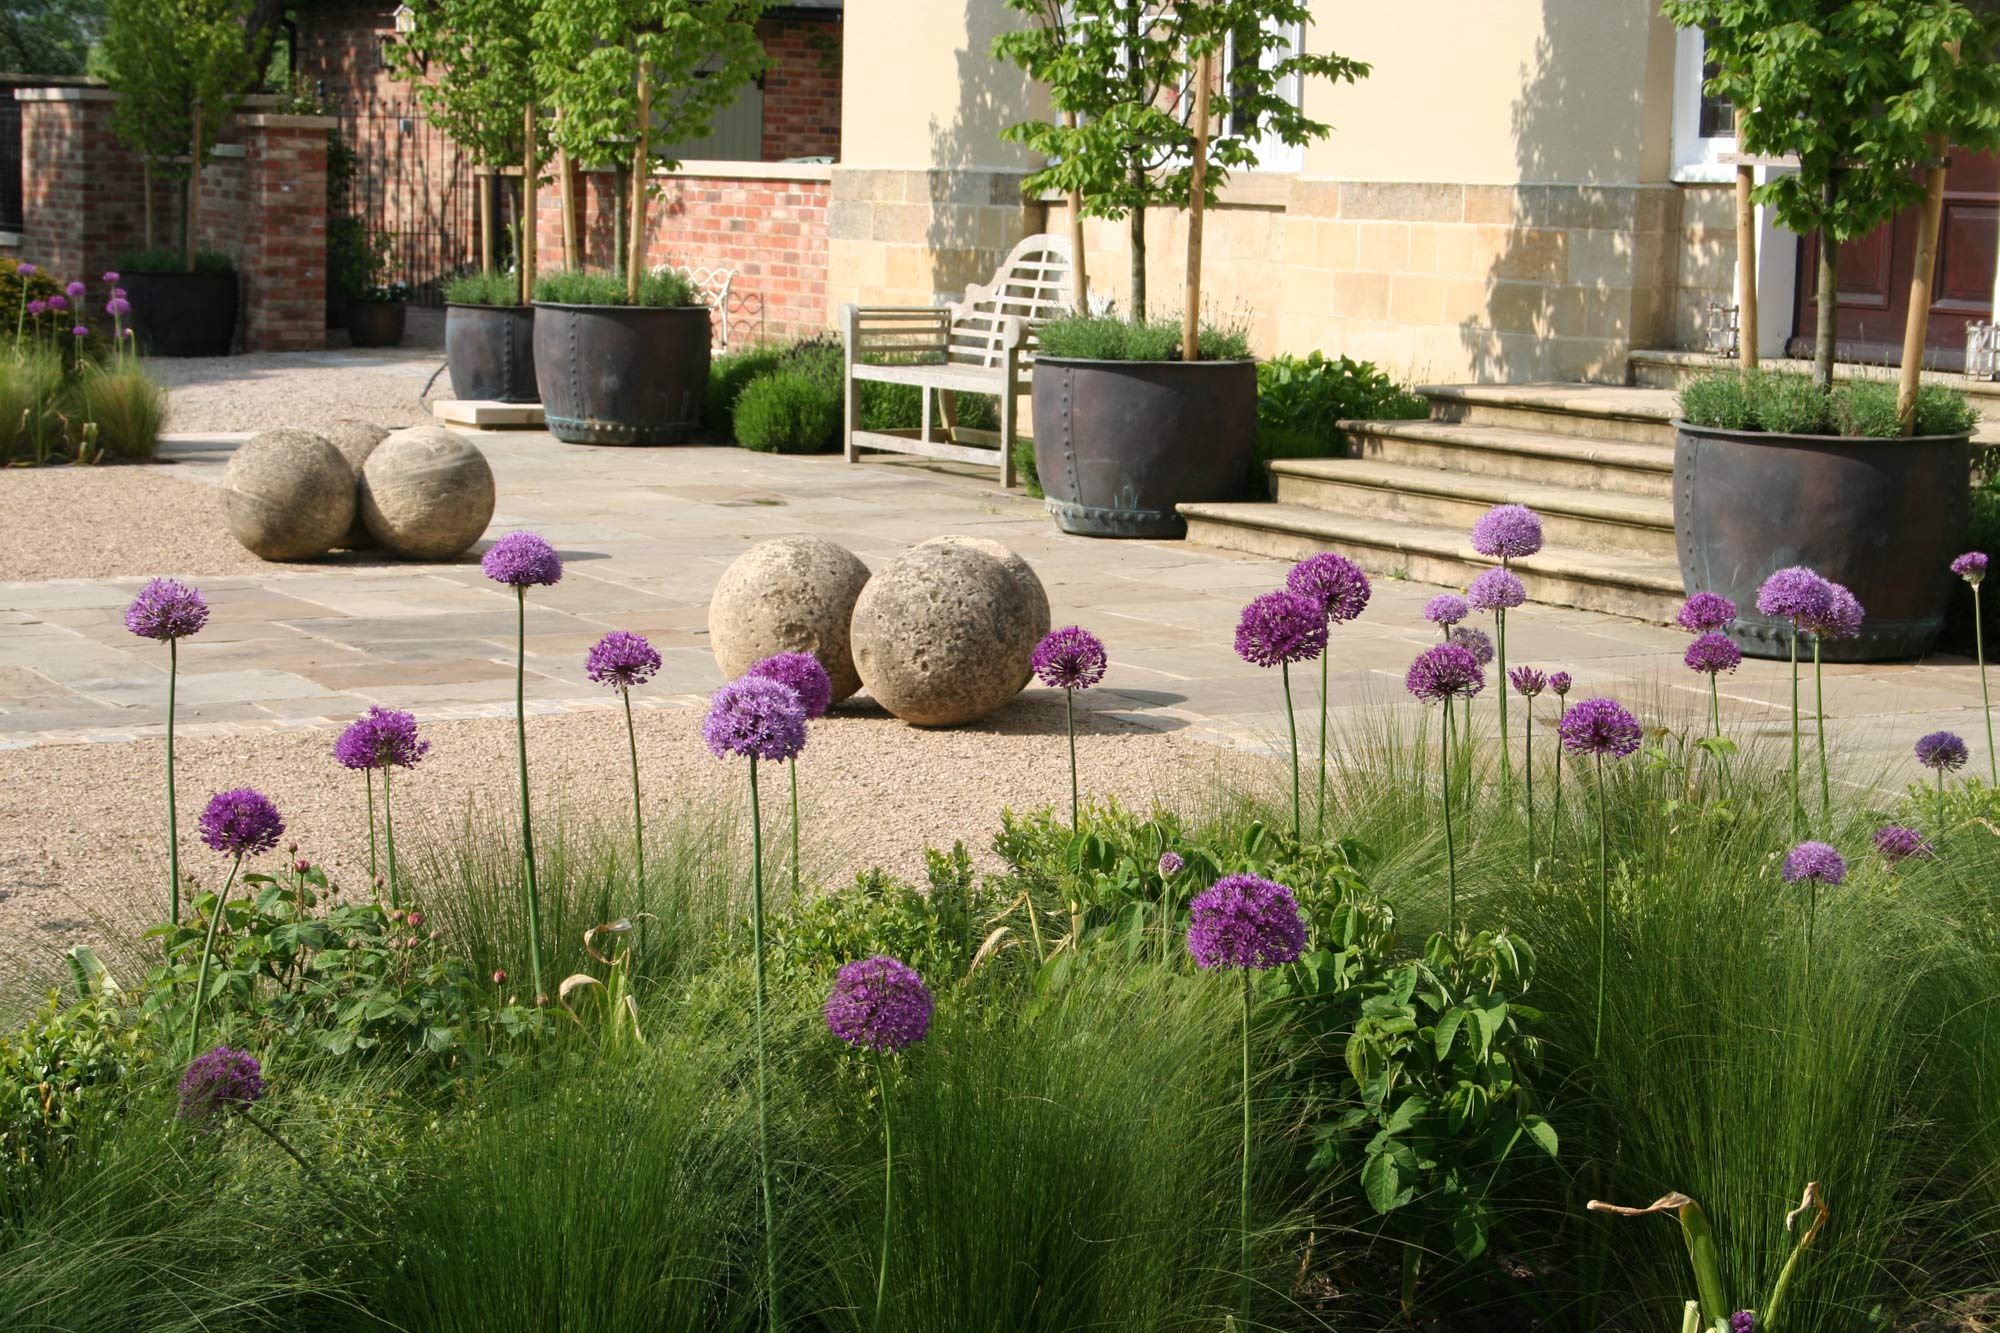 Planted borders including allium flower heads, grasses and roses jostle with stone spheres Design by Peter Eustance